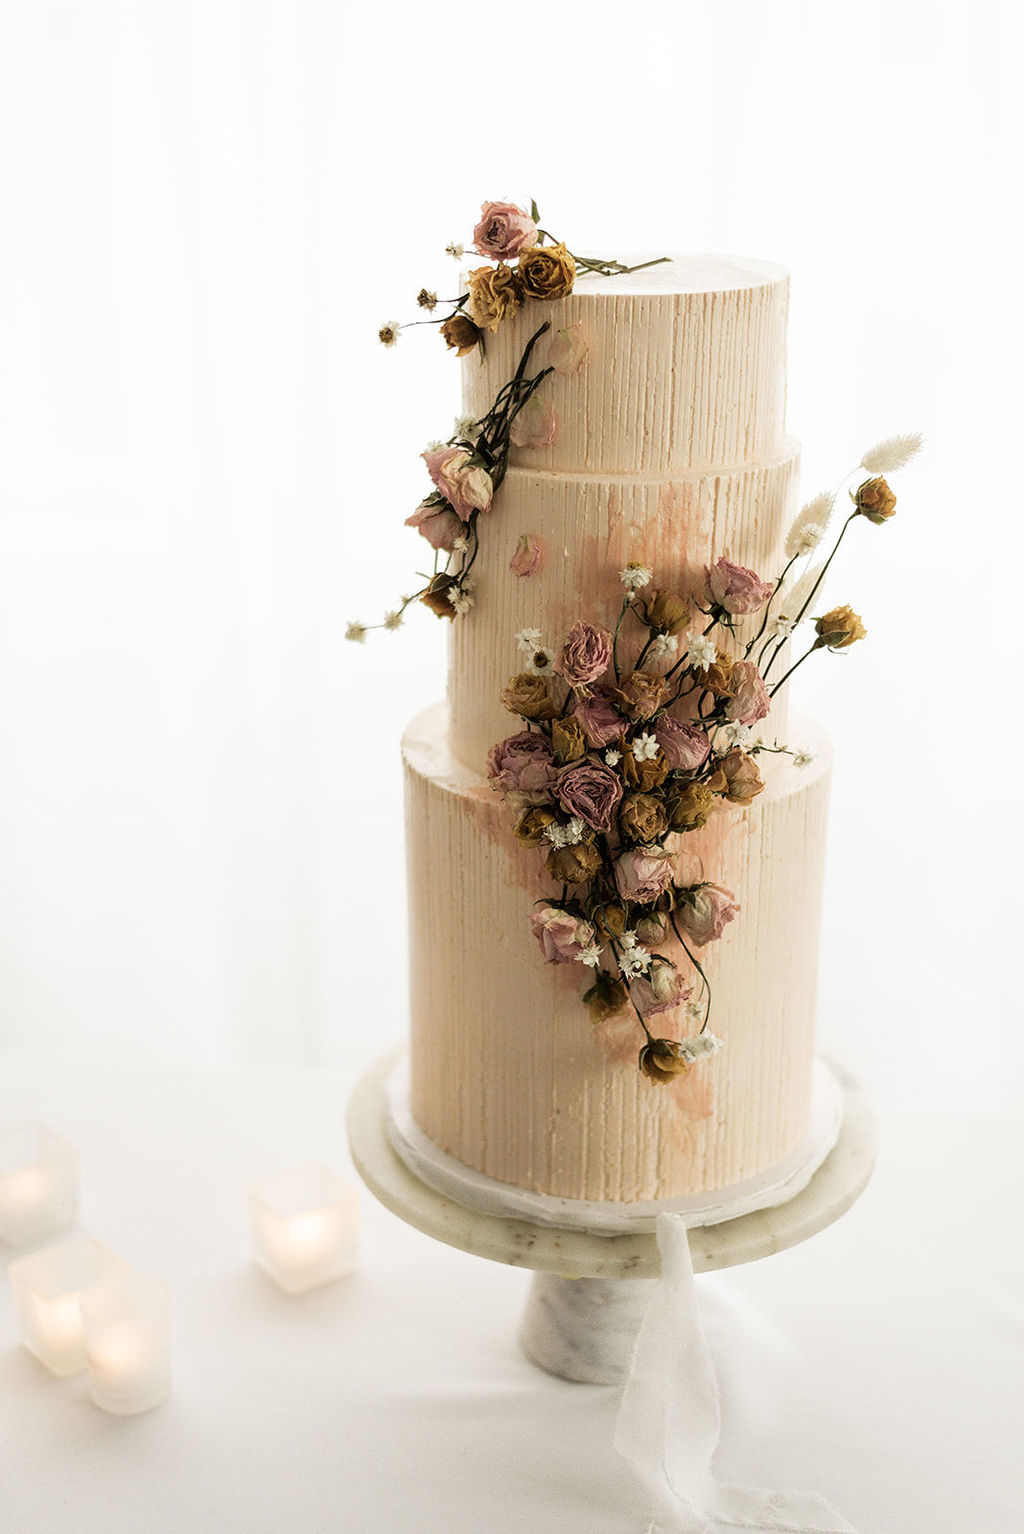 Wedding cake by Love In Bloom Cakes